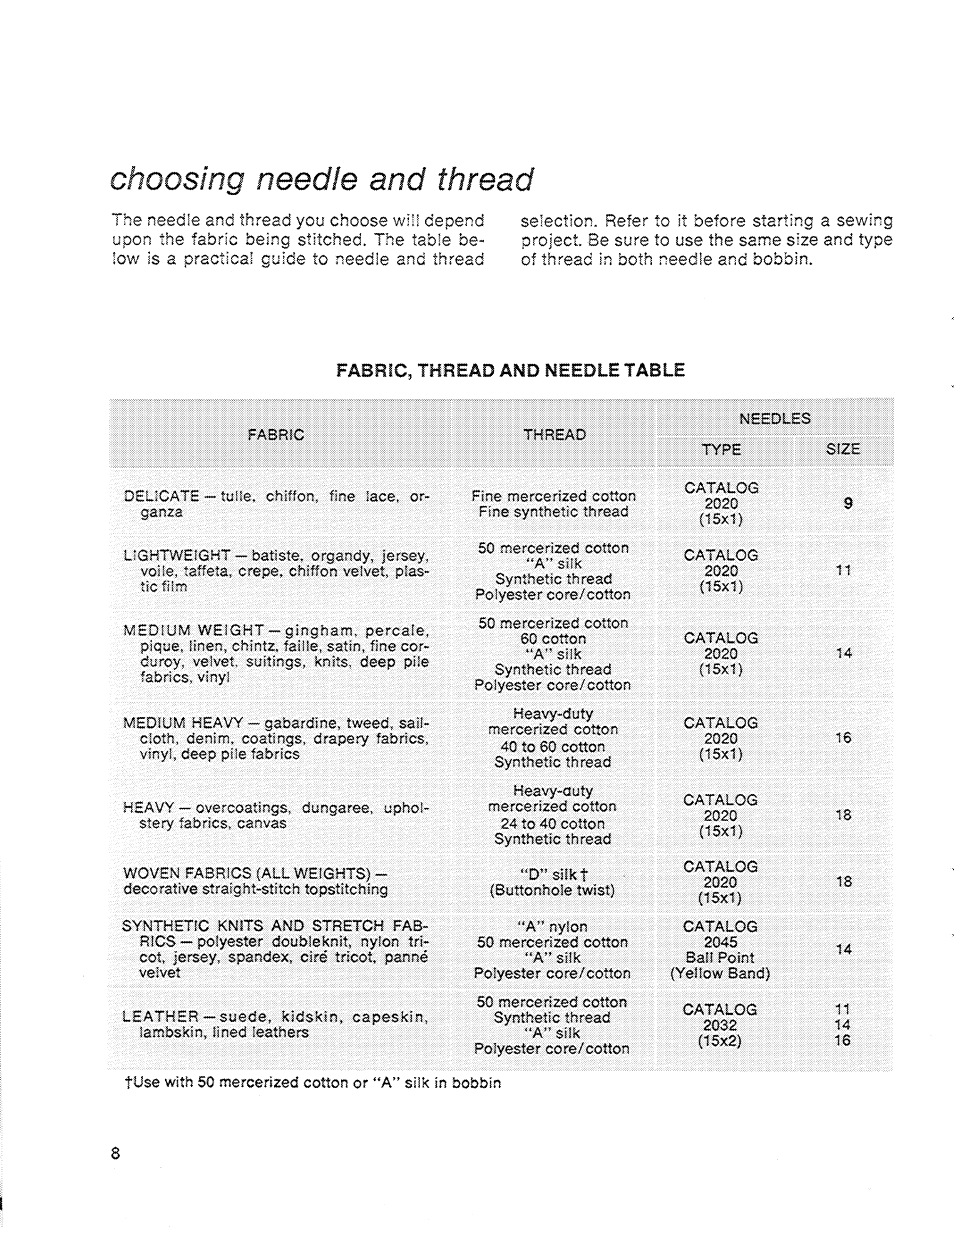 Choosing needle and thread | SINGER 714 Graduate User Manual | Page 10 / 52